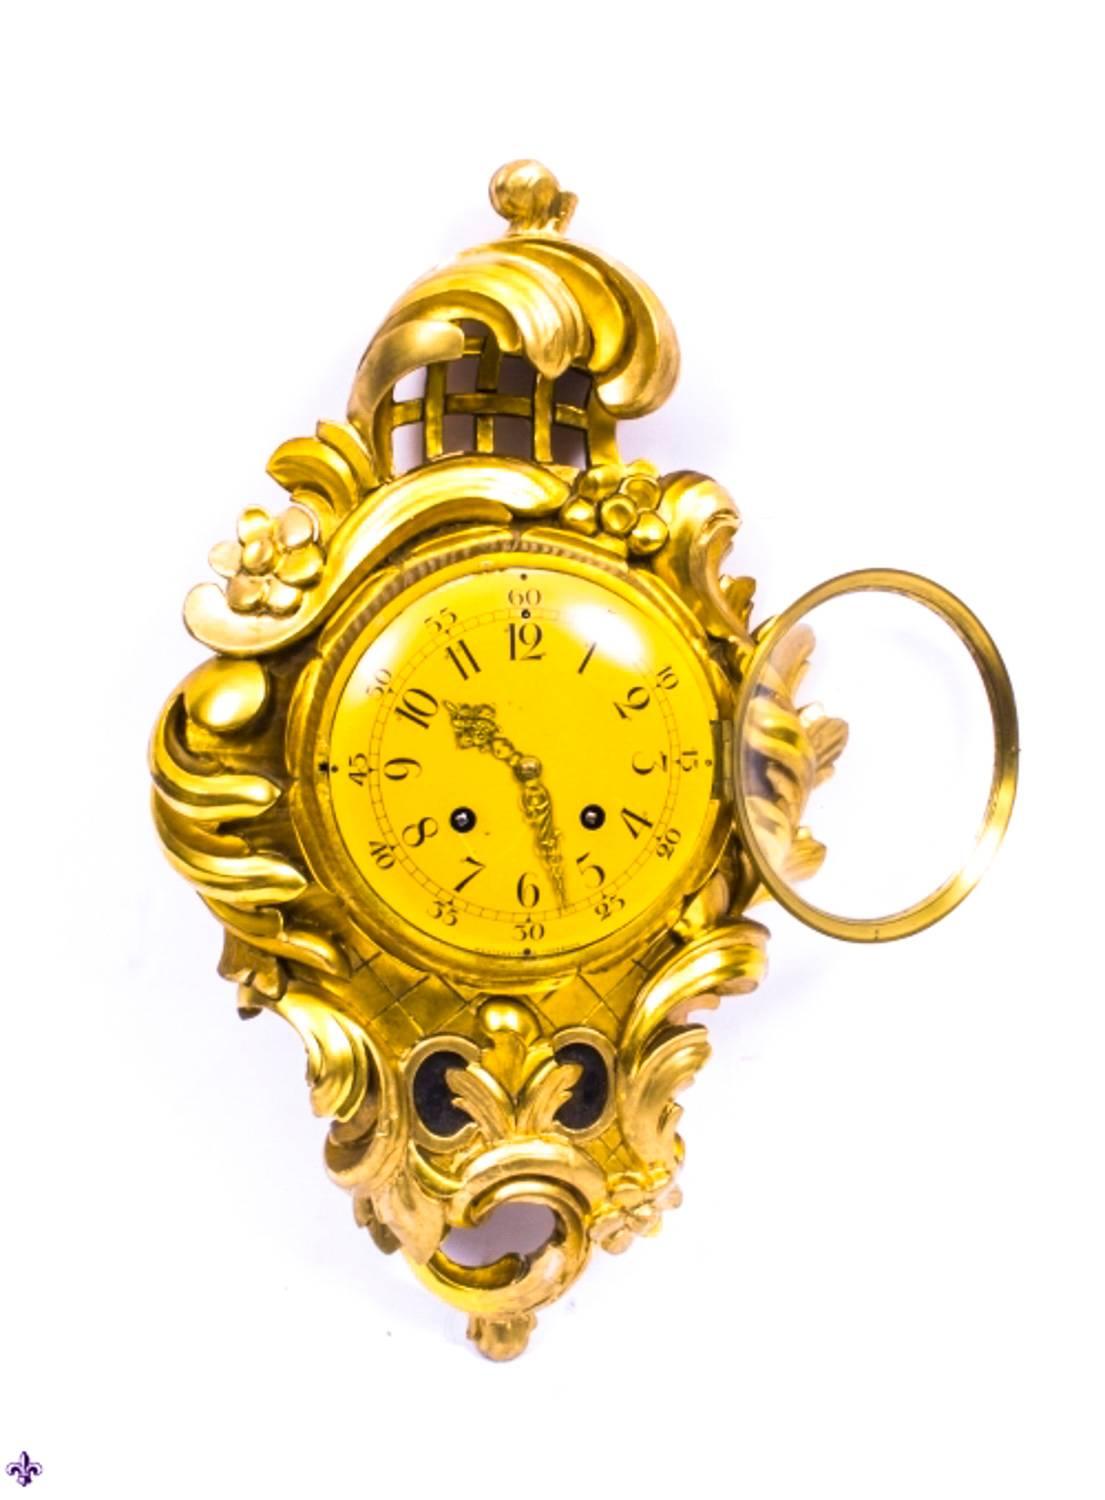 This is a stylish antique Swedish carved giltwood cartel wall clock in the Rocco style, circa 1910 in date.

This clock was made by Westerstrand in Toreboda, Sweden, bears their signature and has a magnificent hand-carved giltwood case. 

The